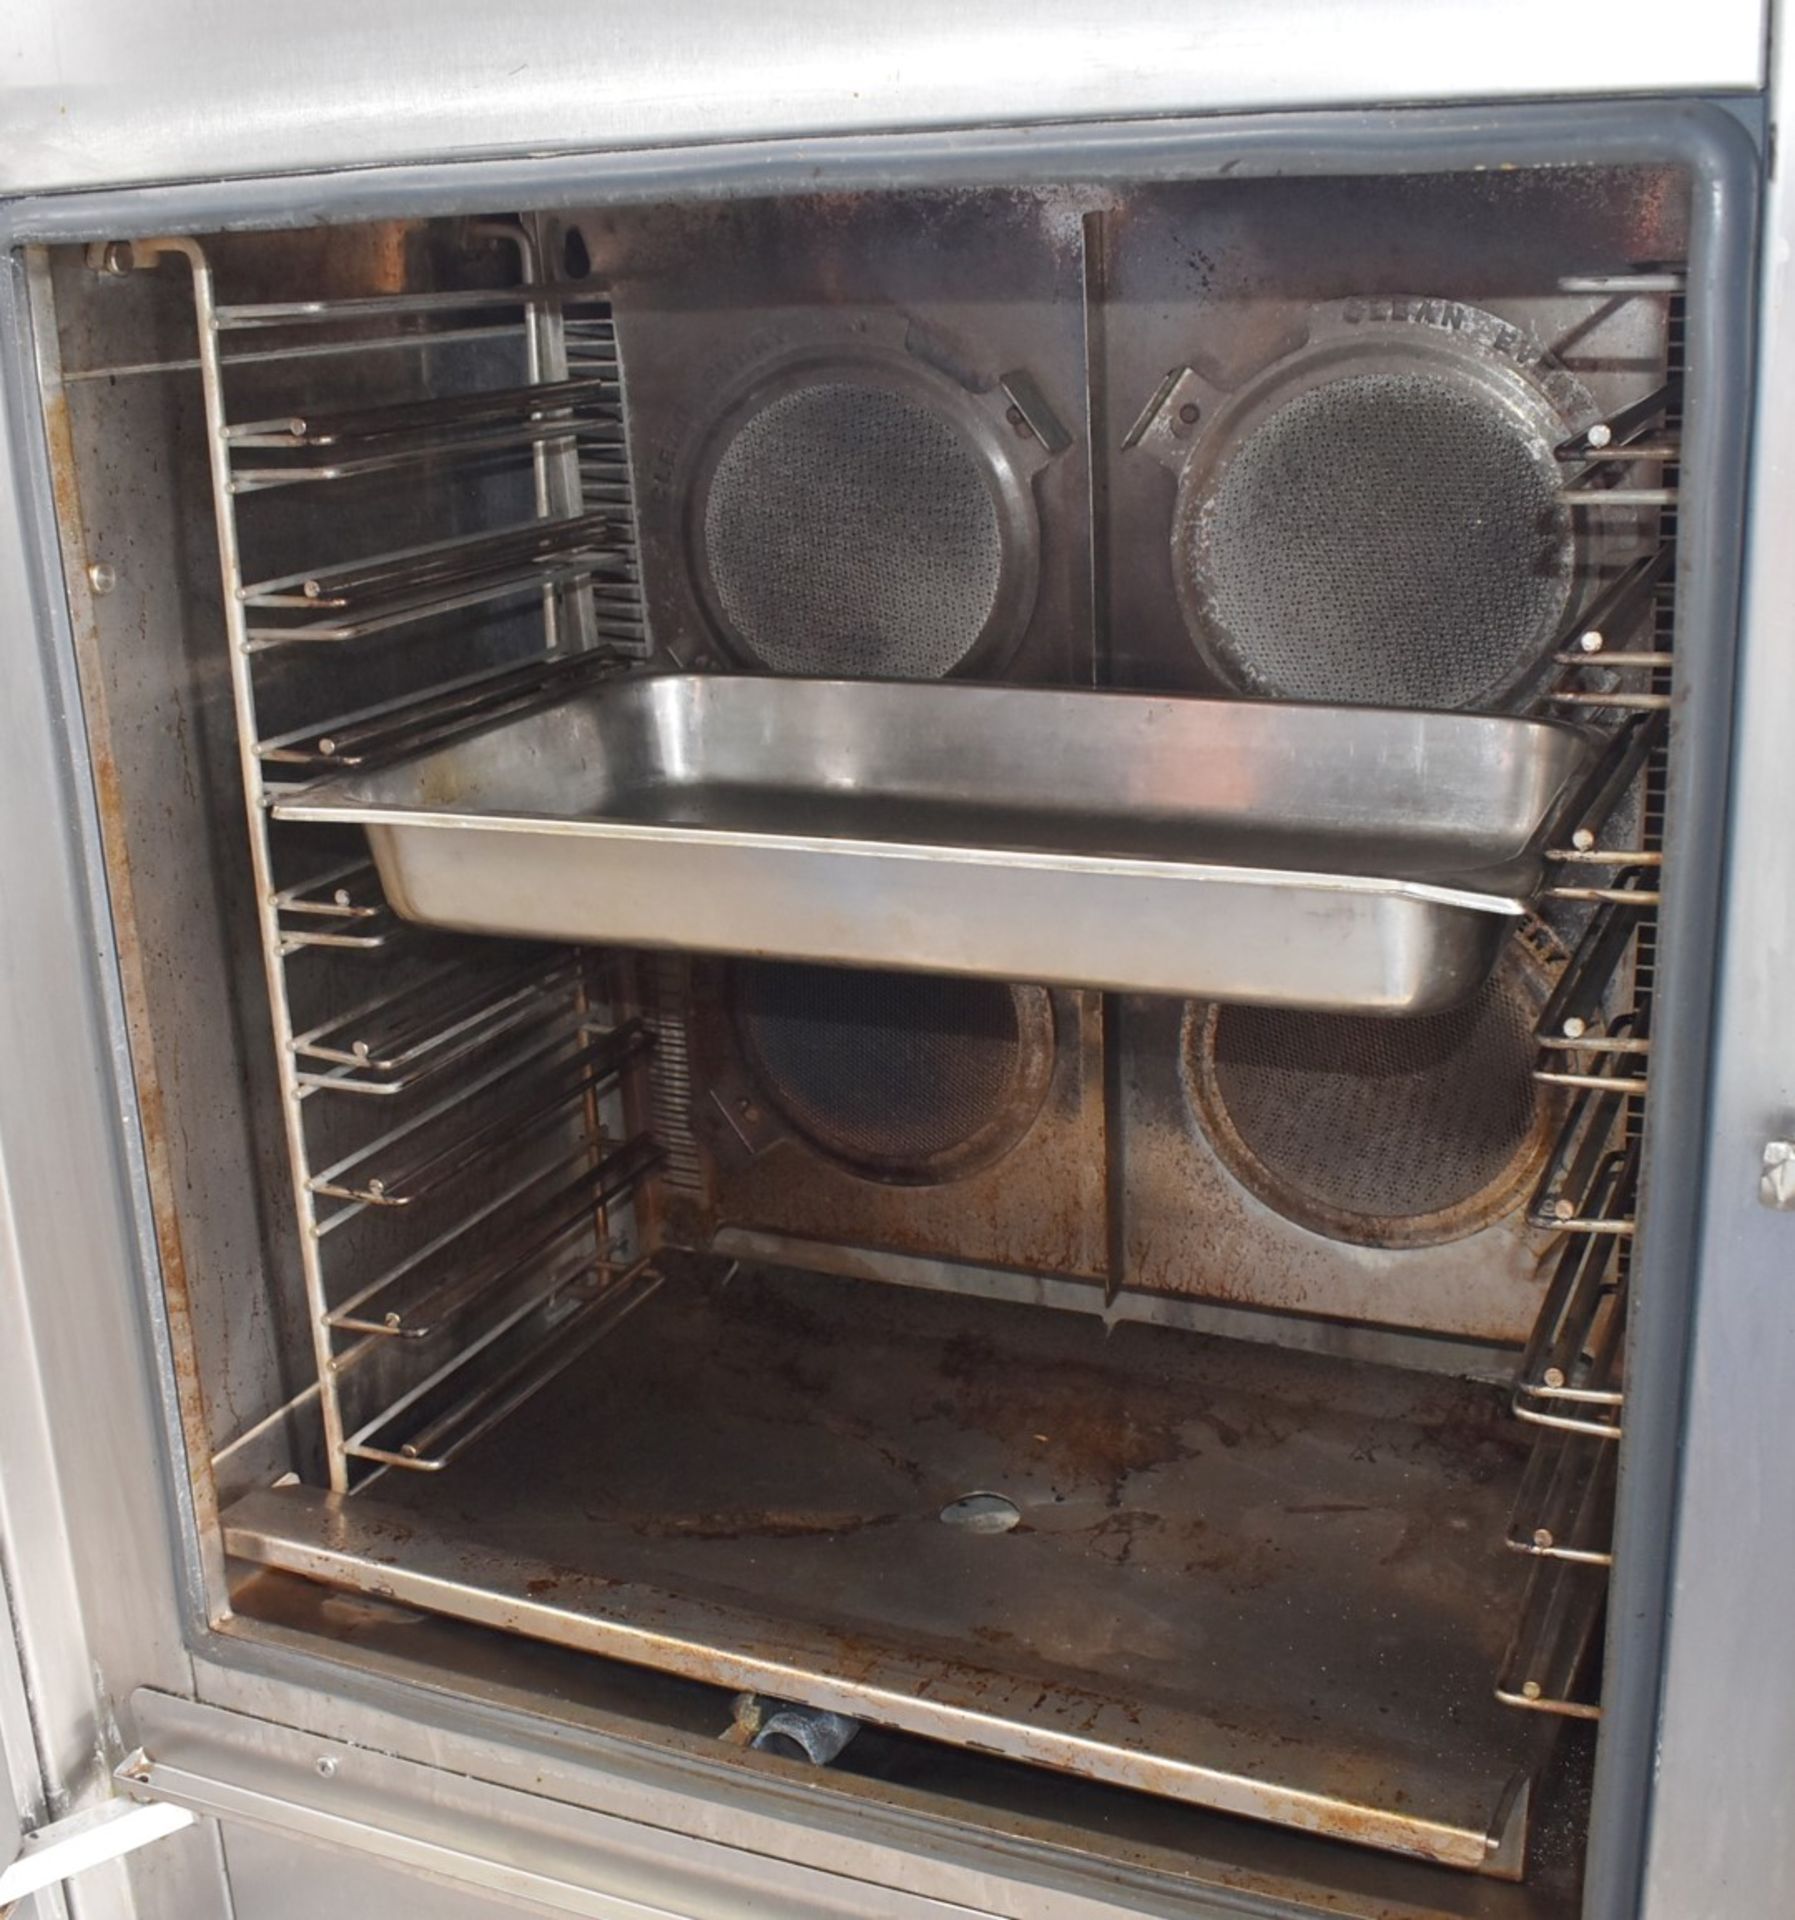 1 x Fri-Jado Turbo Retail 8 Grid Combi Oven - 3 Phase Combi Oven With Various Cooking Programs - Image 10 of 24